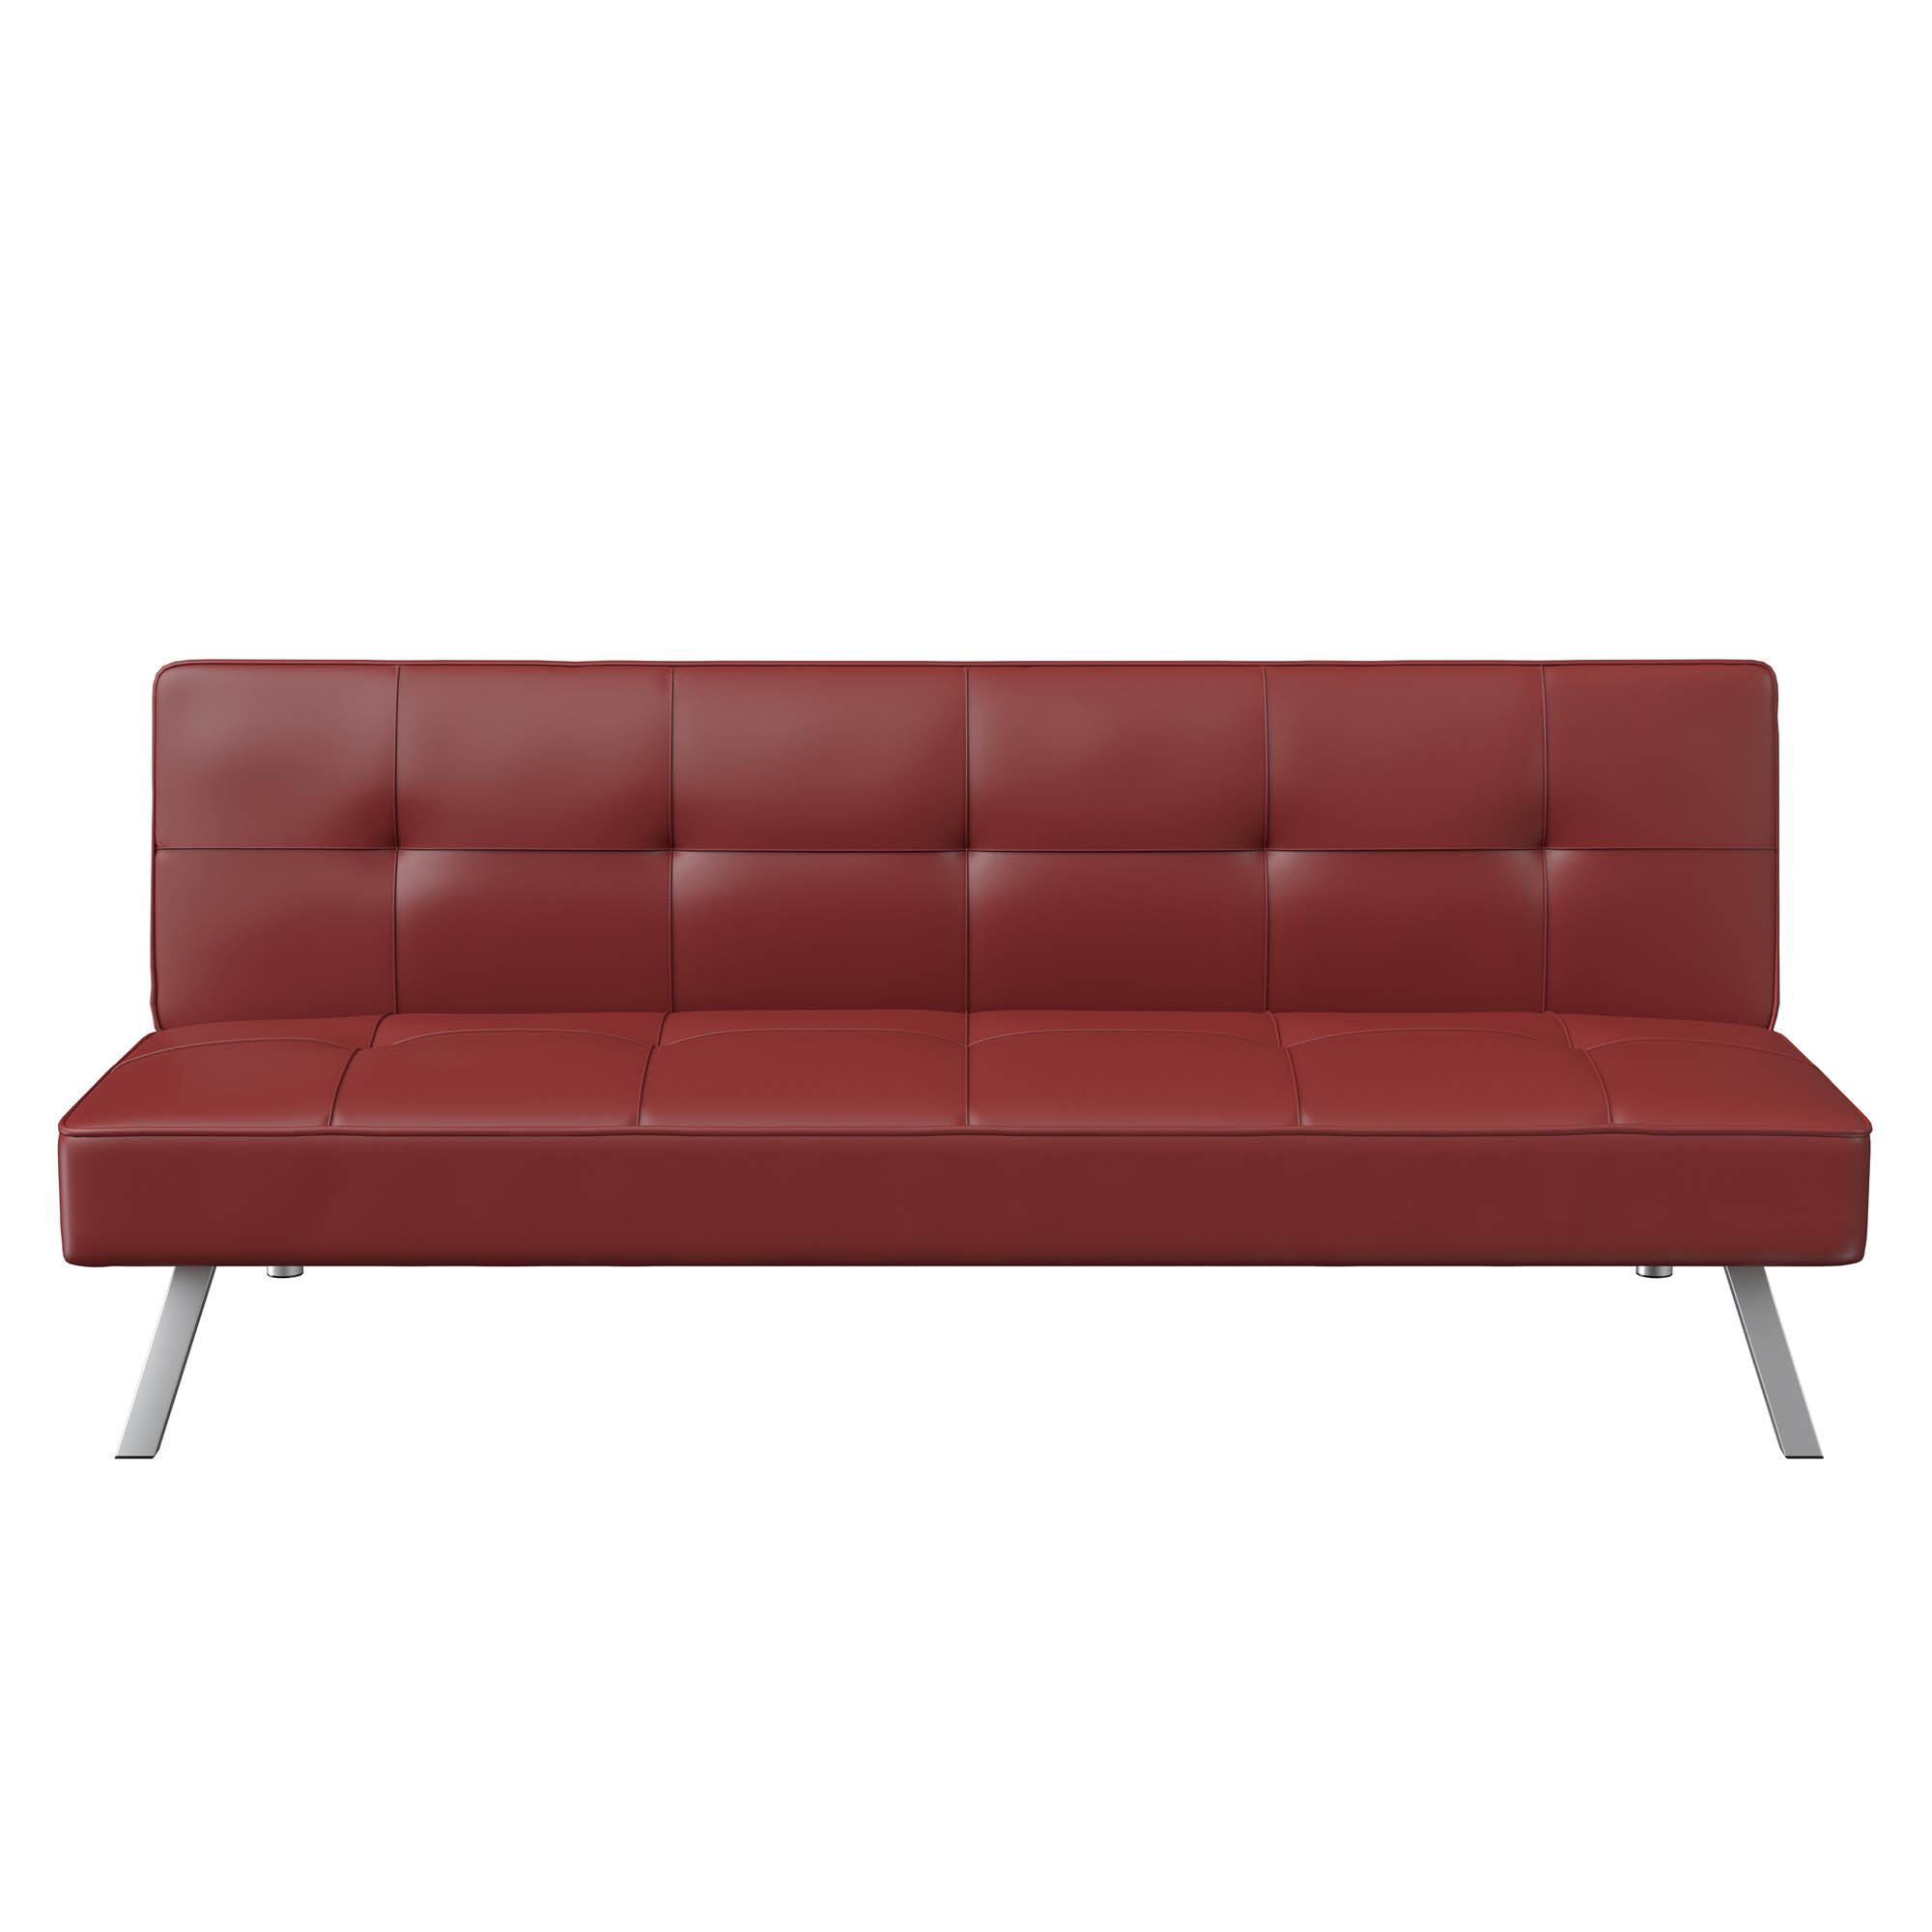 Serta Chelsea Modern Futon, Red Faux Leather - image 4 of 12